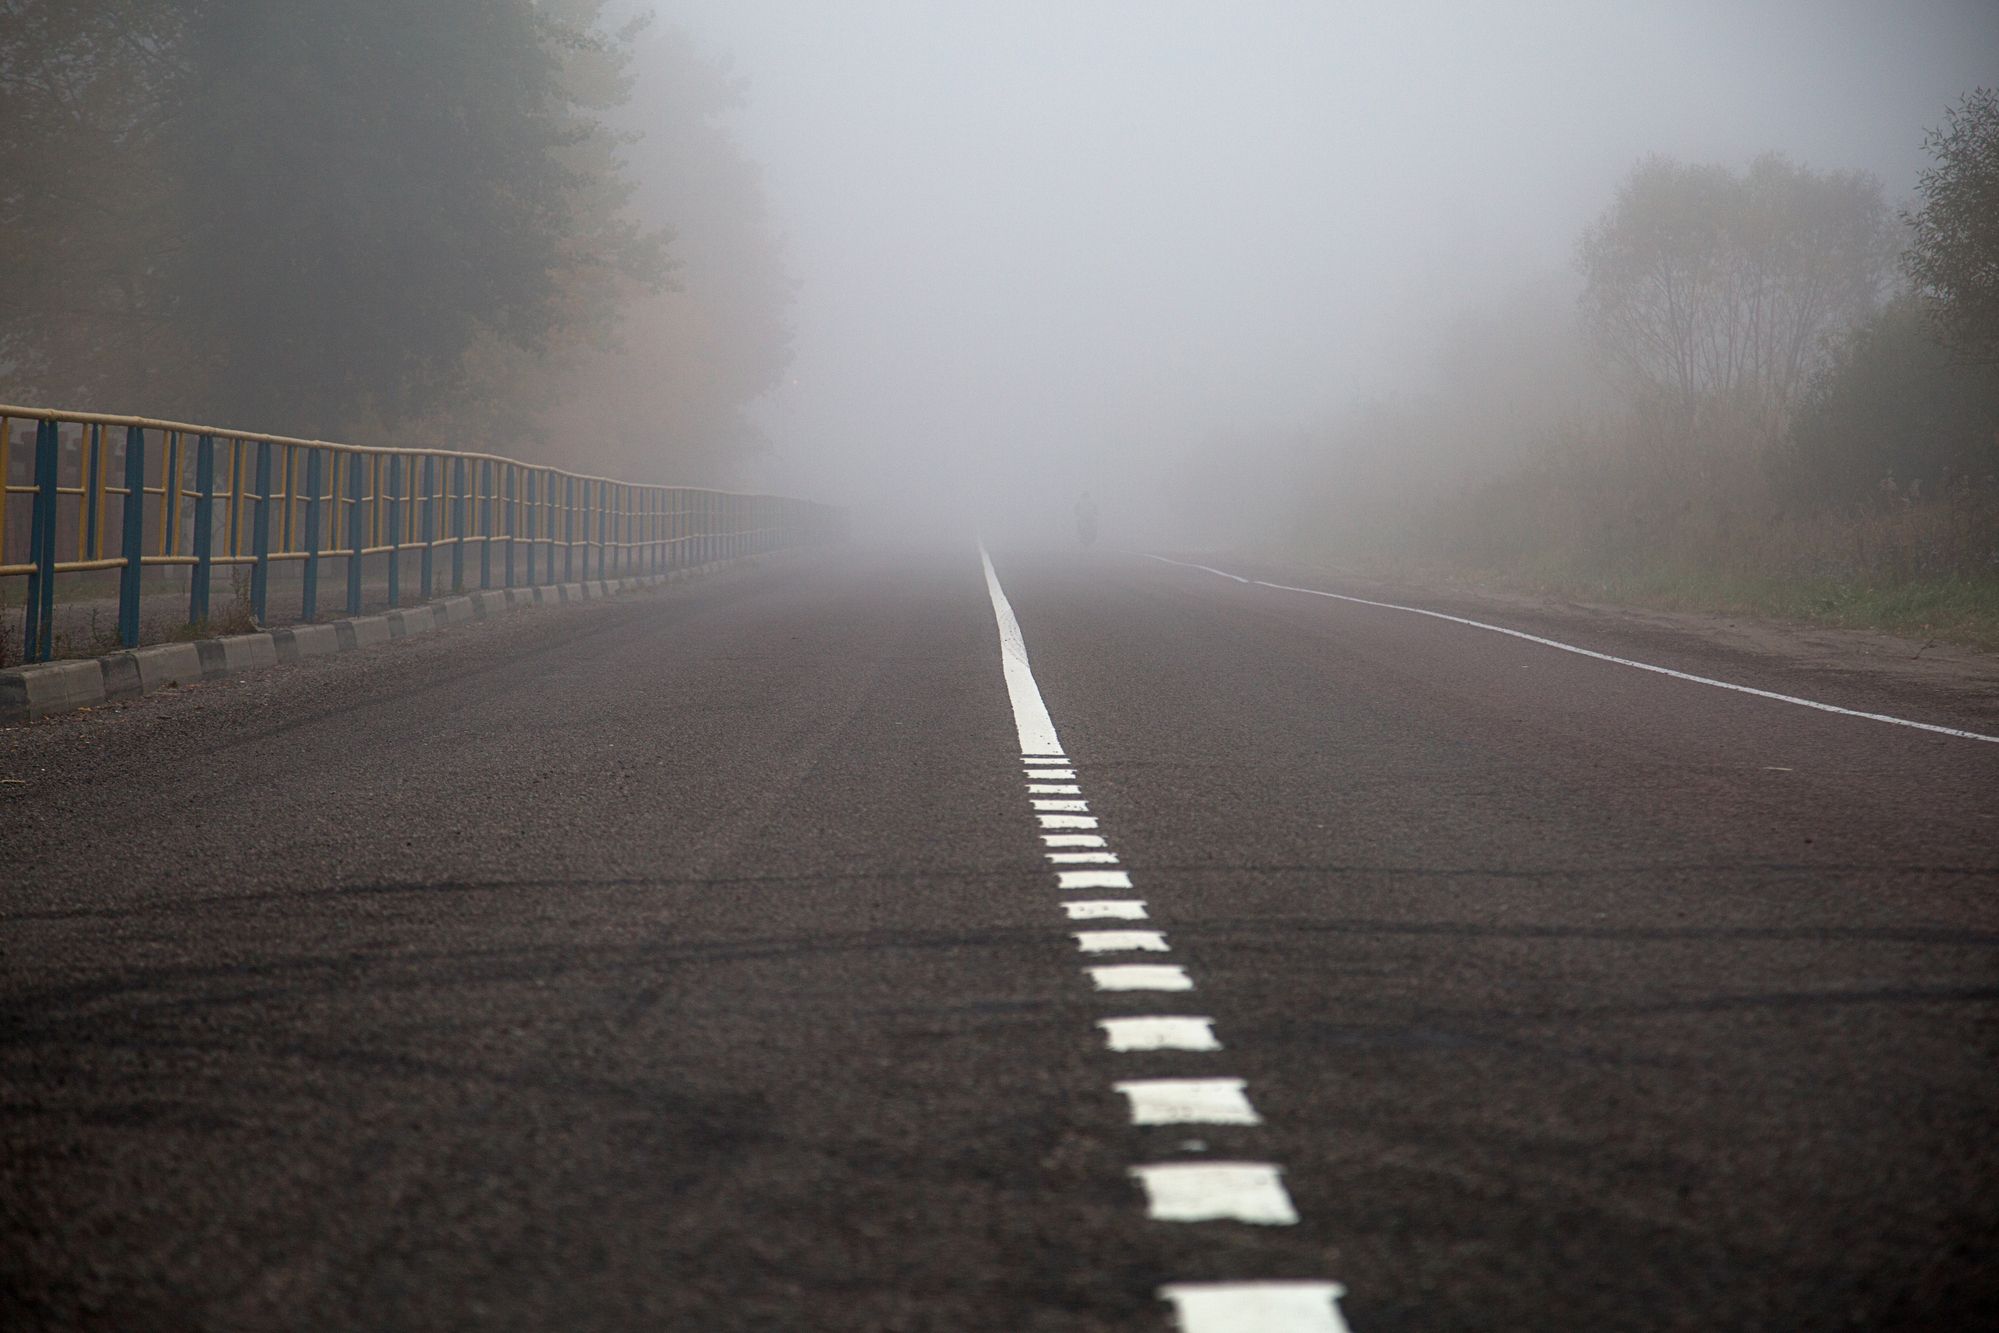 Tips for driving in fog - B Importance of being patient and cautious.